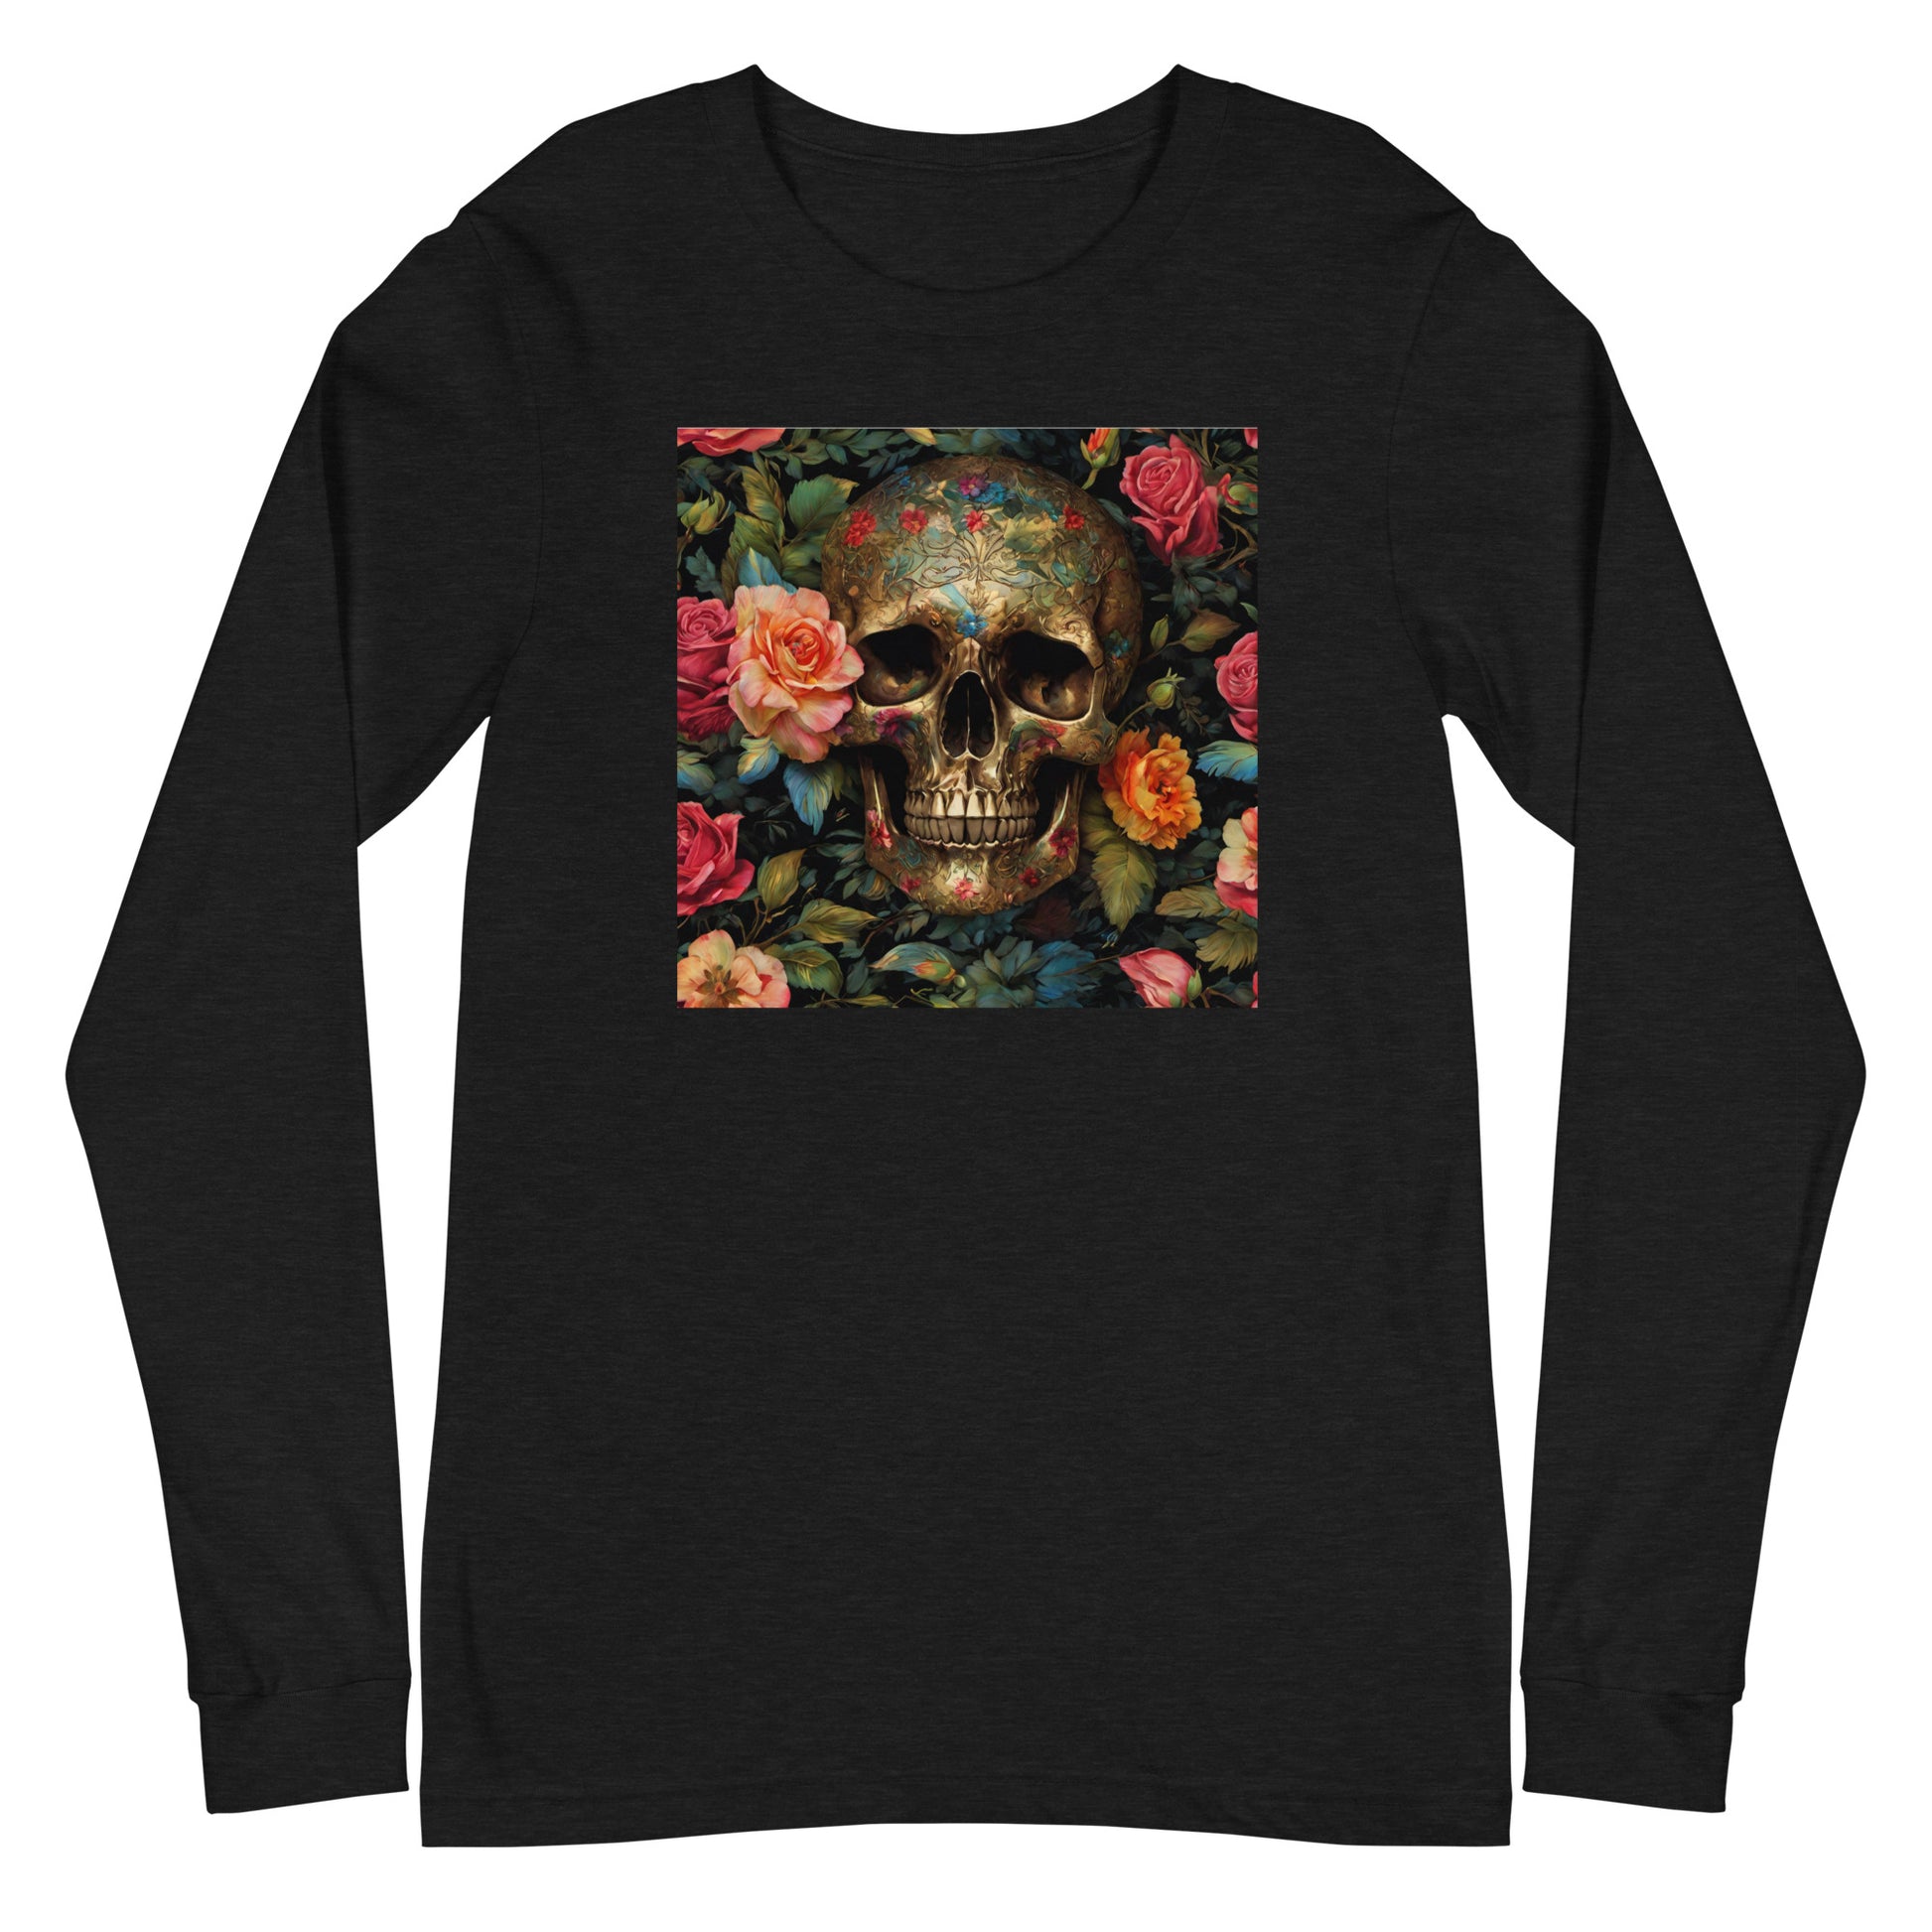 Skull and Roses Graphic Long Sleeve Tee Black Heather